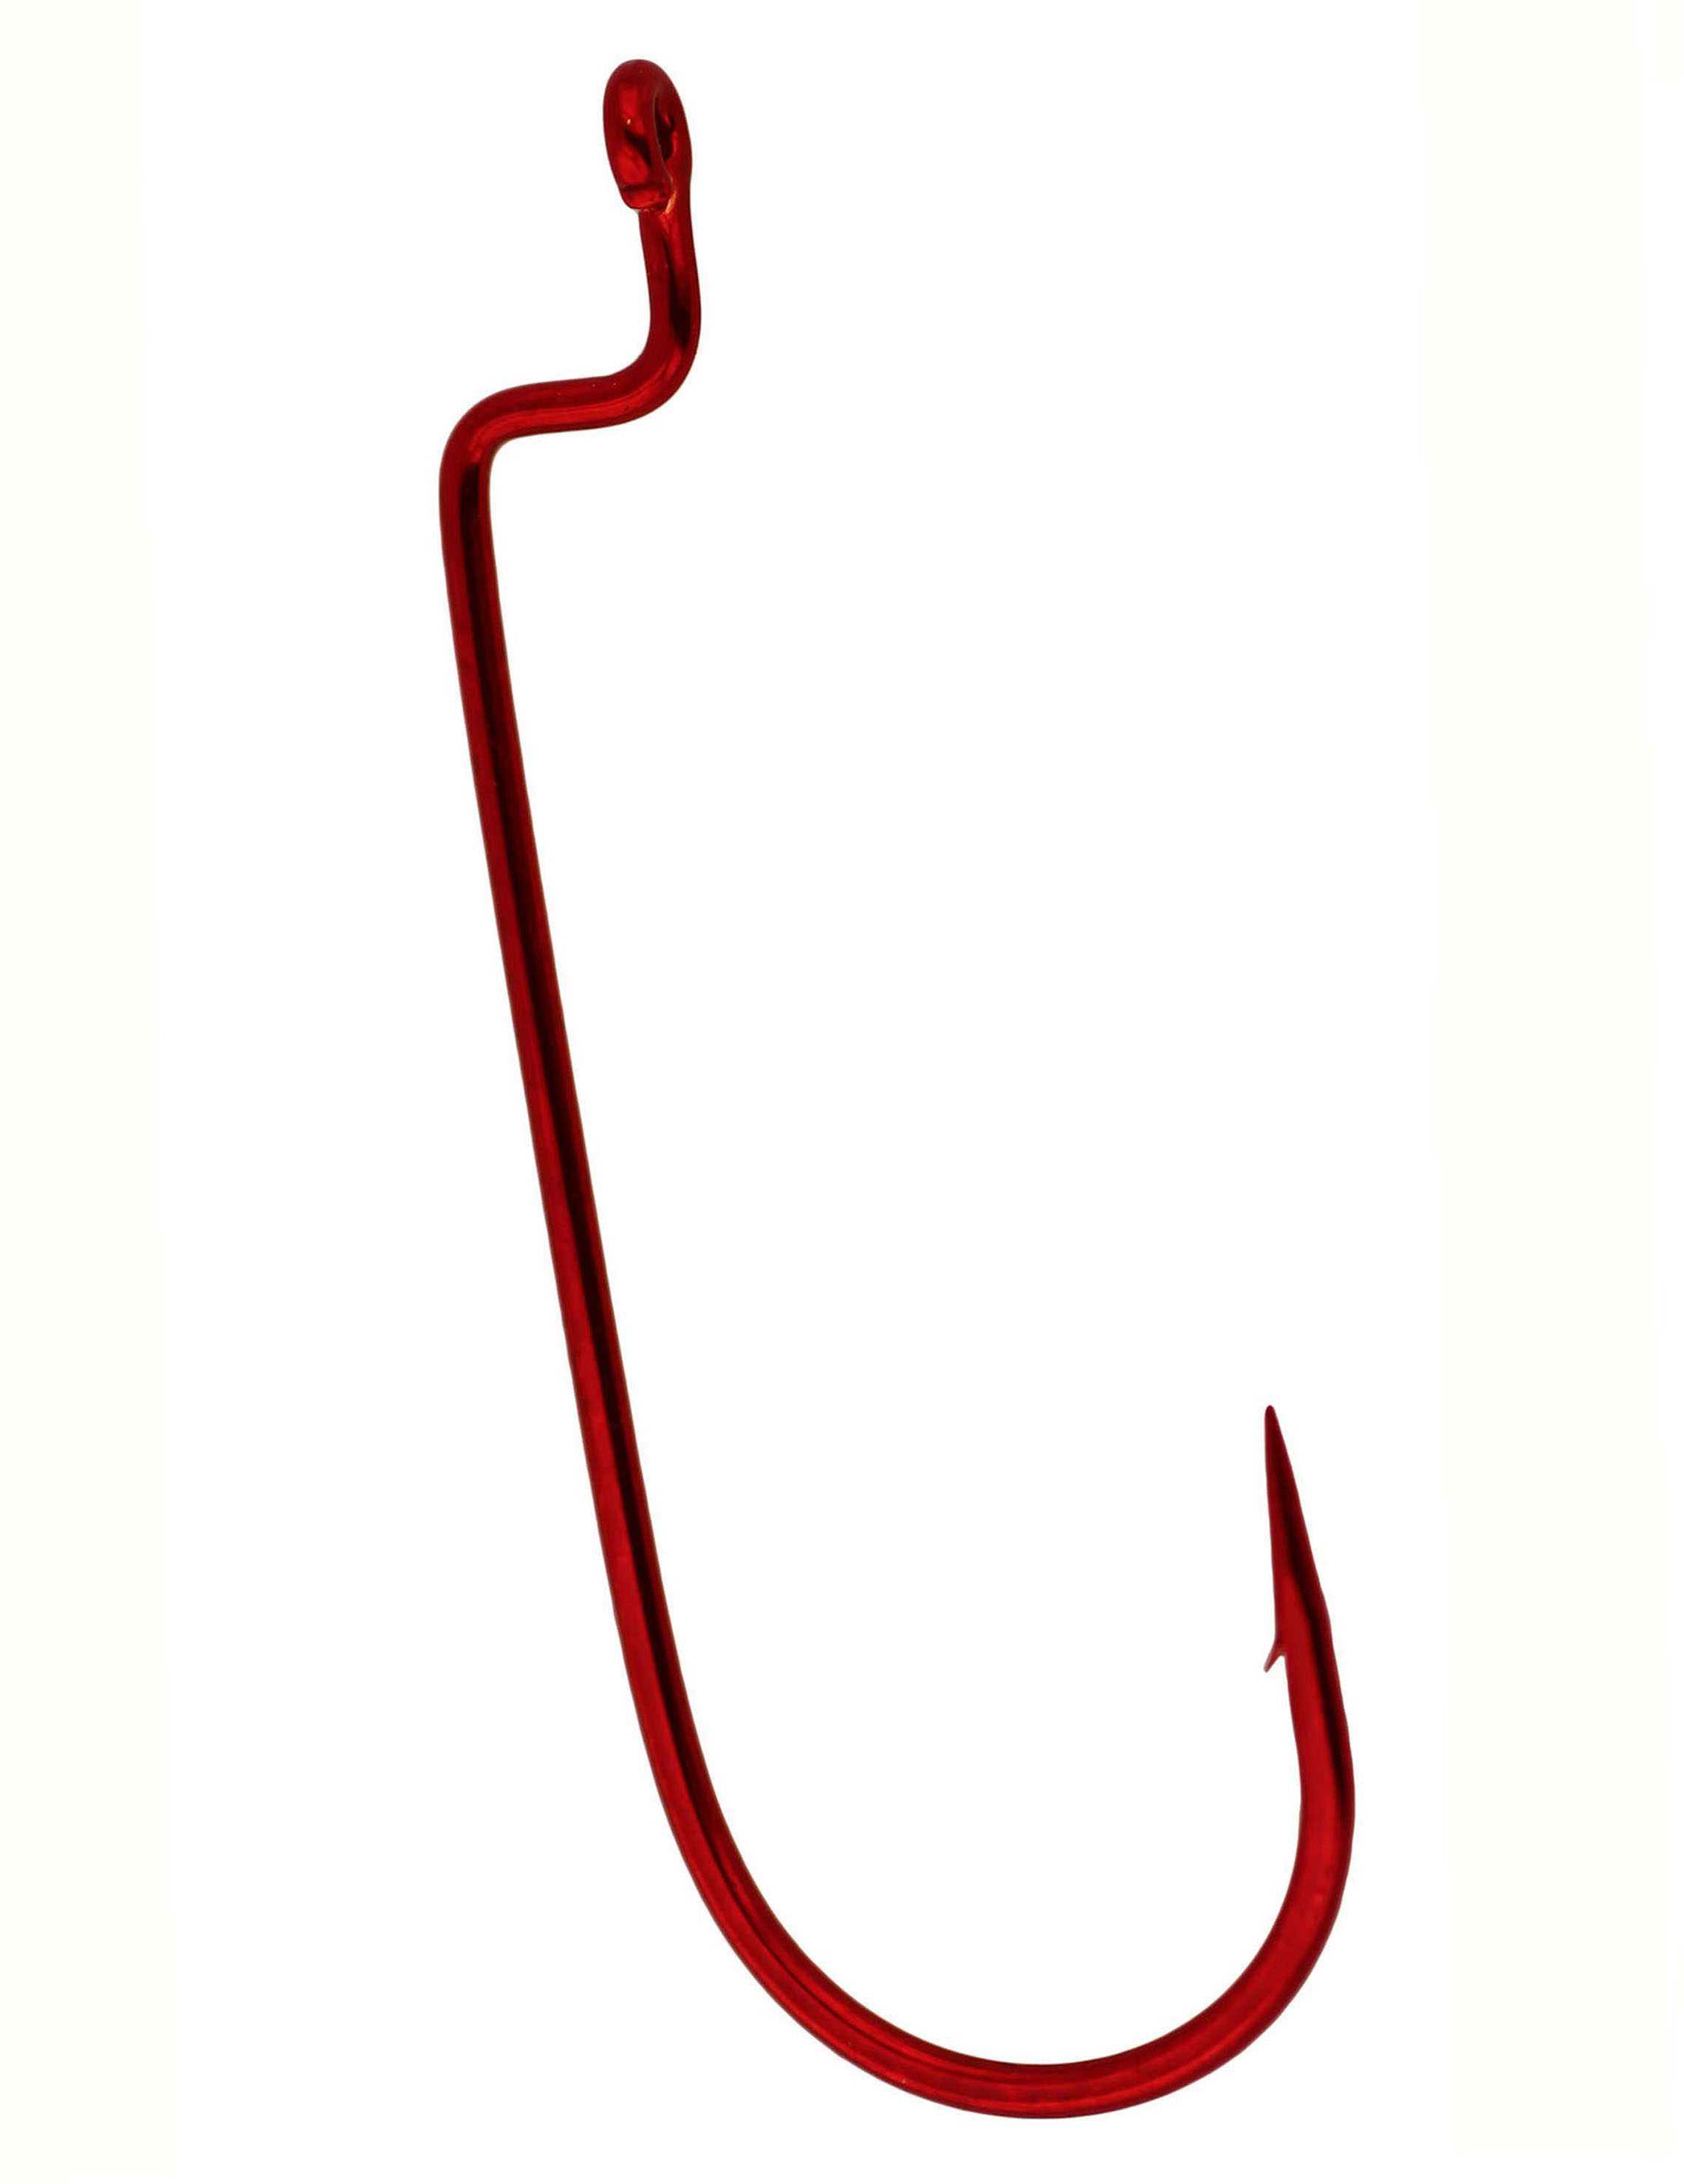 Gamakatsu / Spro Worm Offset Round Bend Hook, Red Size 1/0 Md: 54311